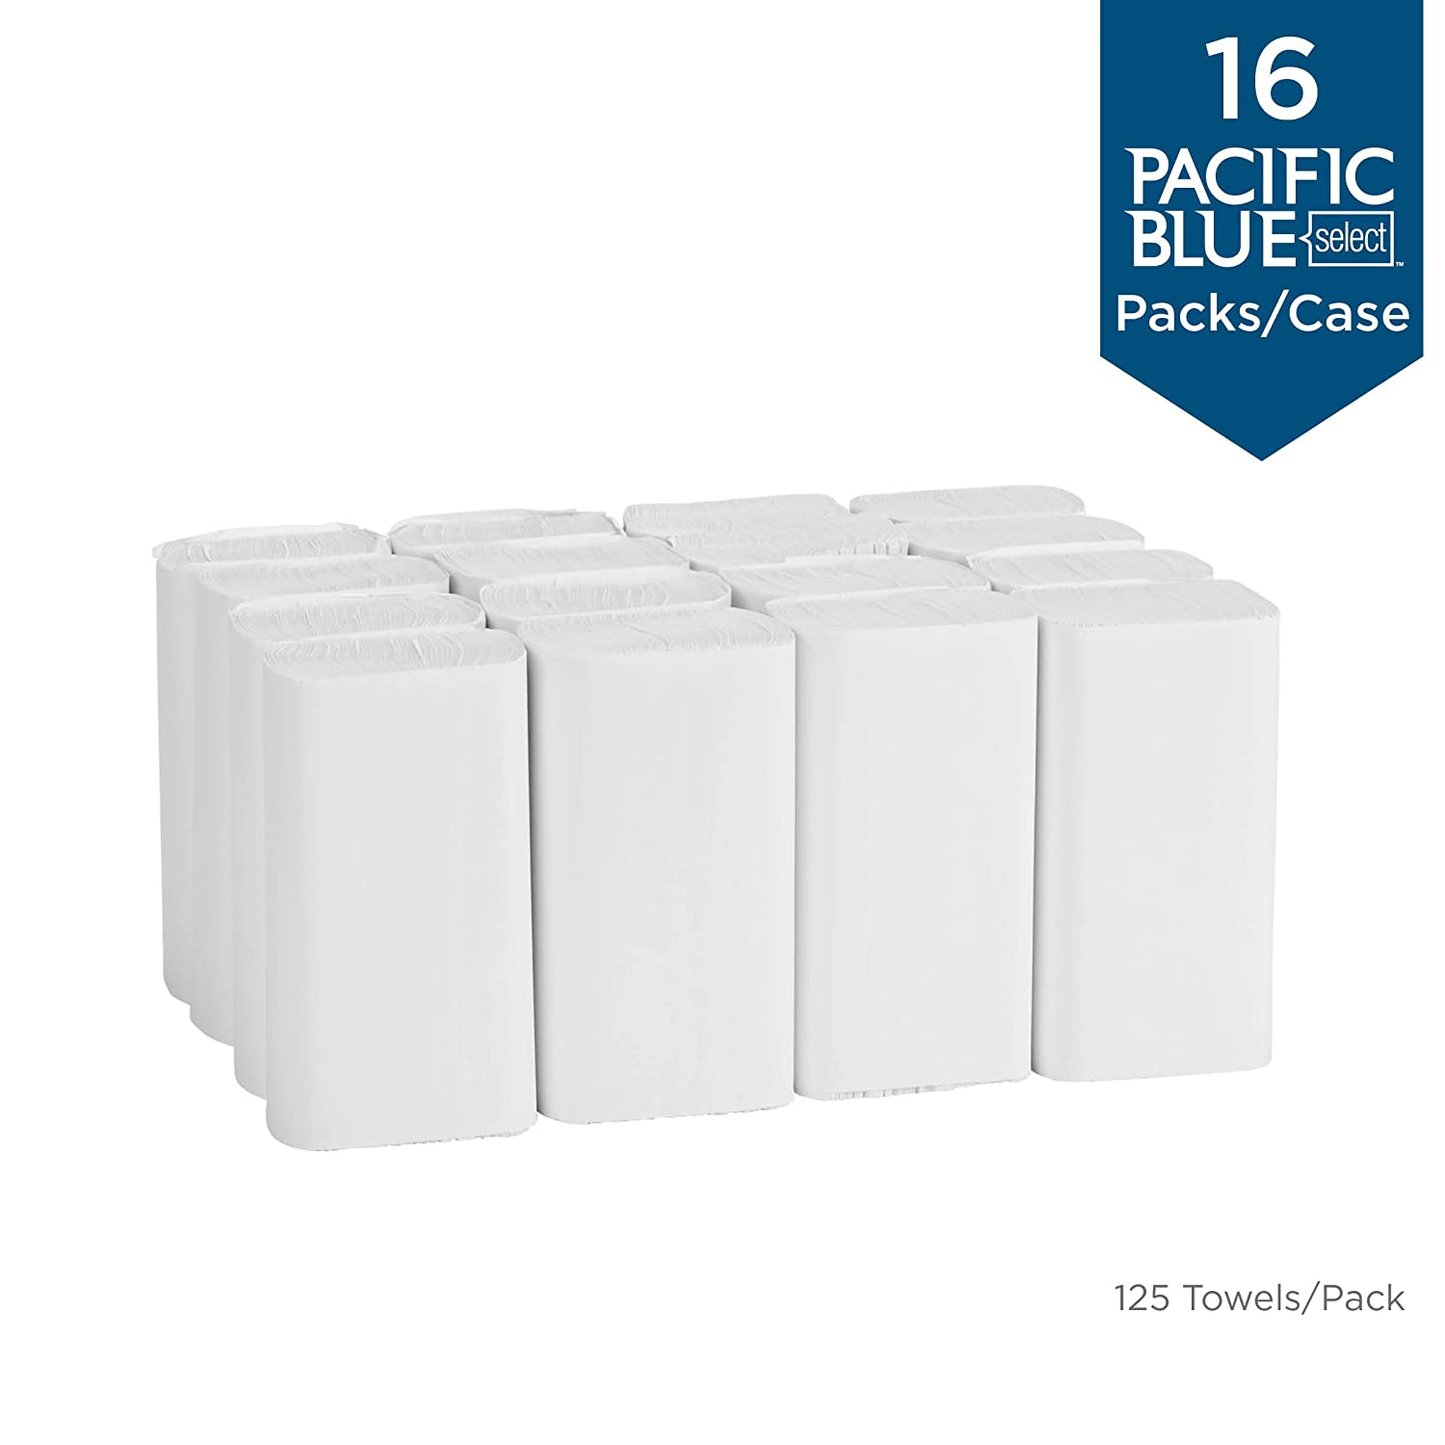 Pacific Blue Select Multifold Premium 2-Ply Paper Towels by GP PRO (), White, 21000, 125 Paper Towels per Pack, 16 Packs per Case